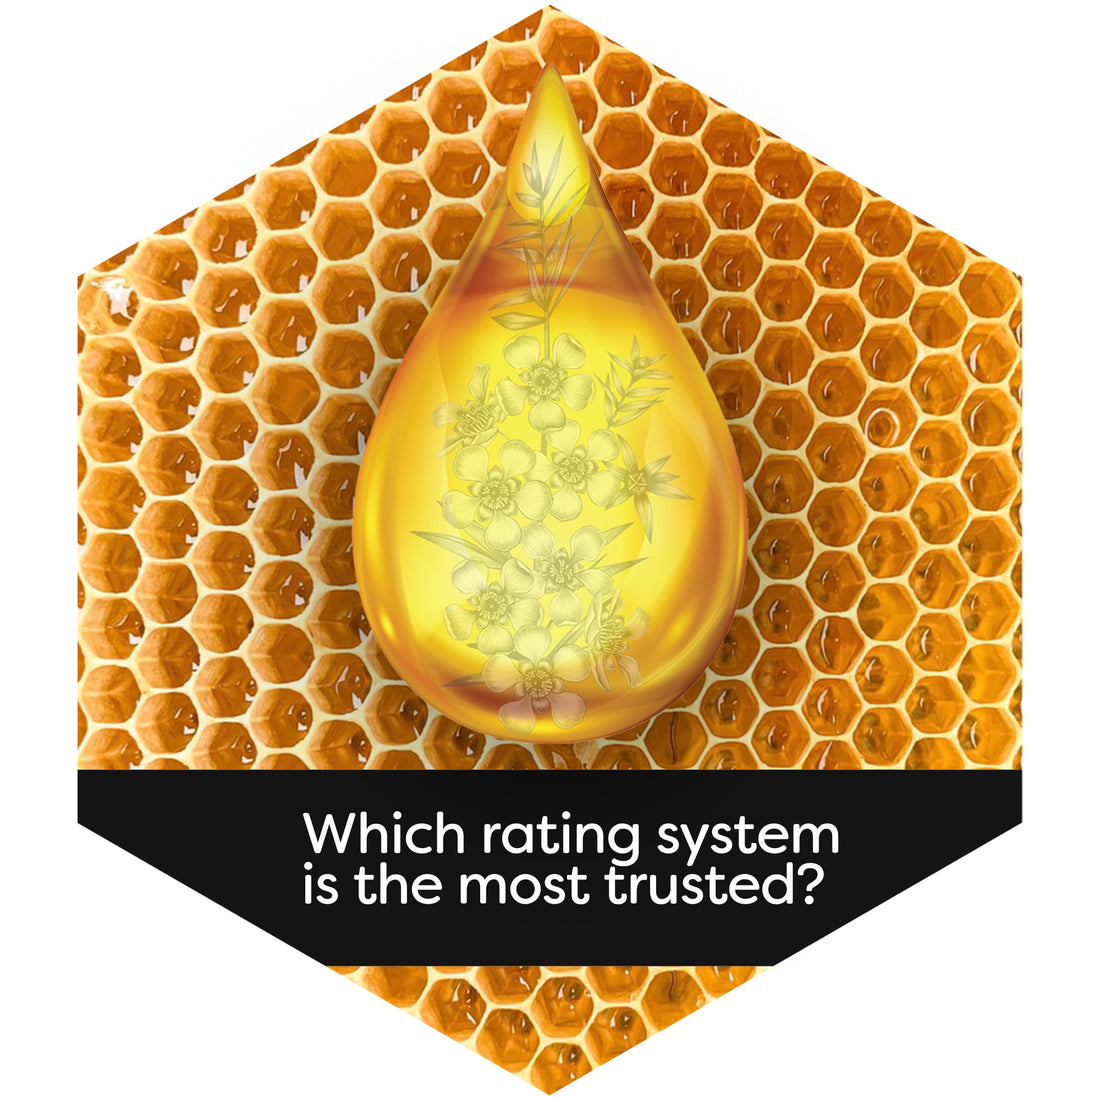 What is the best grade or quality of Manuka Honey?